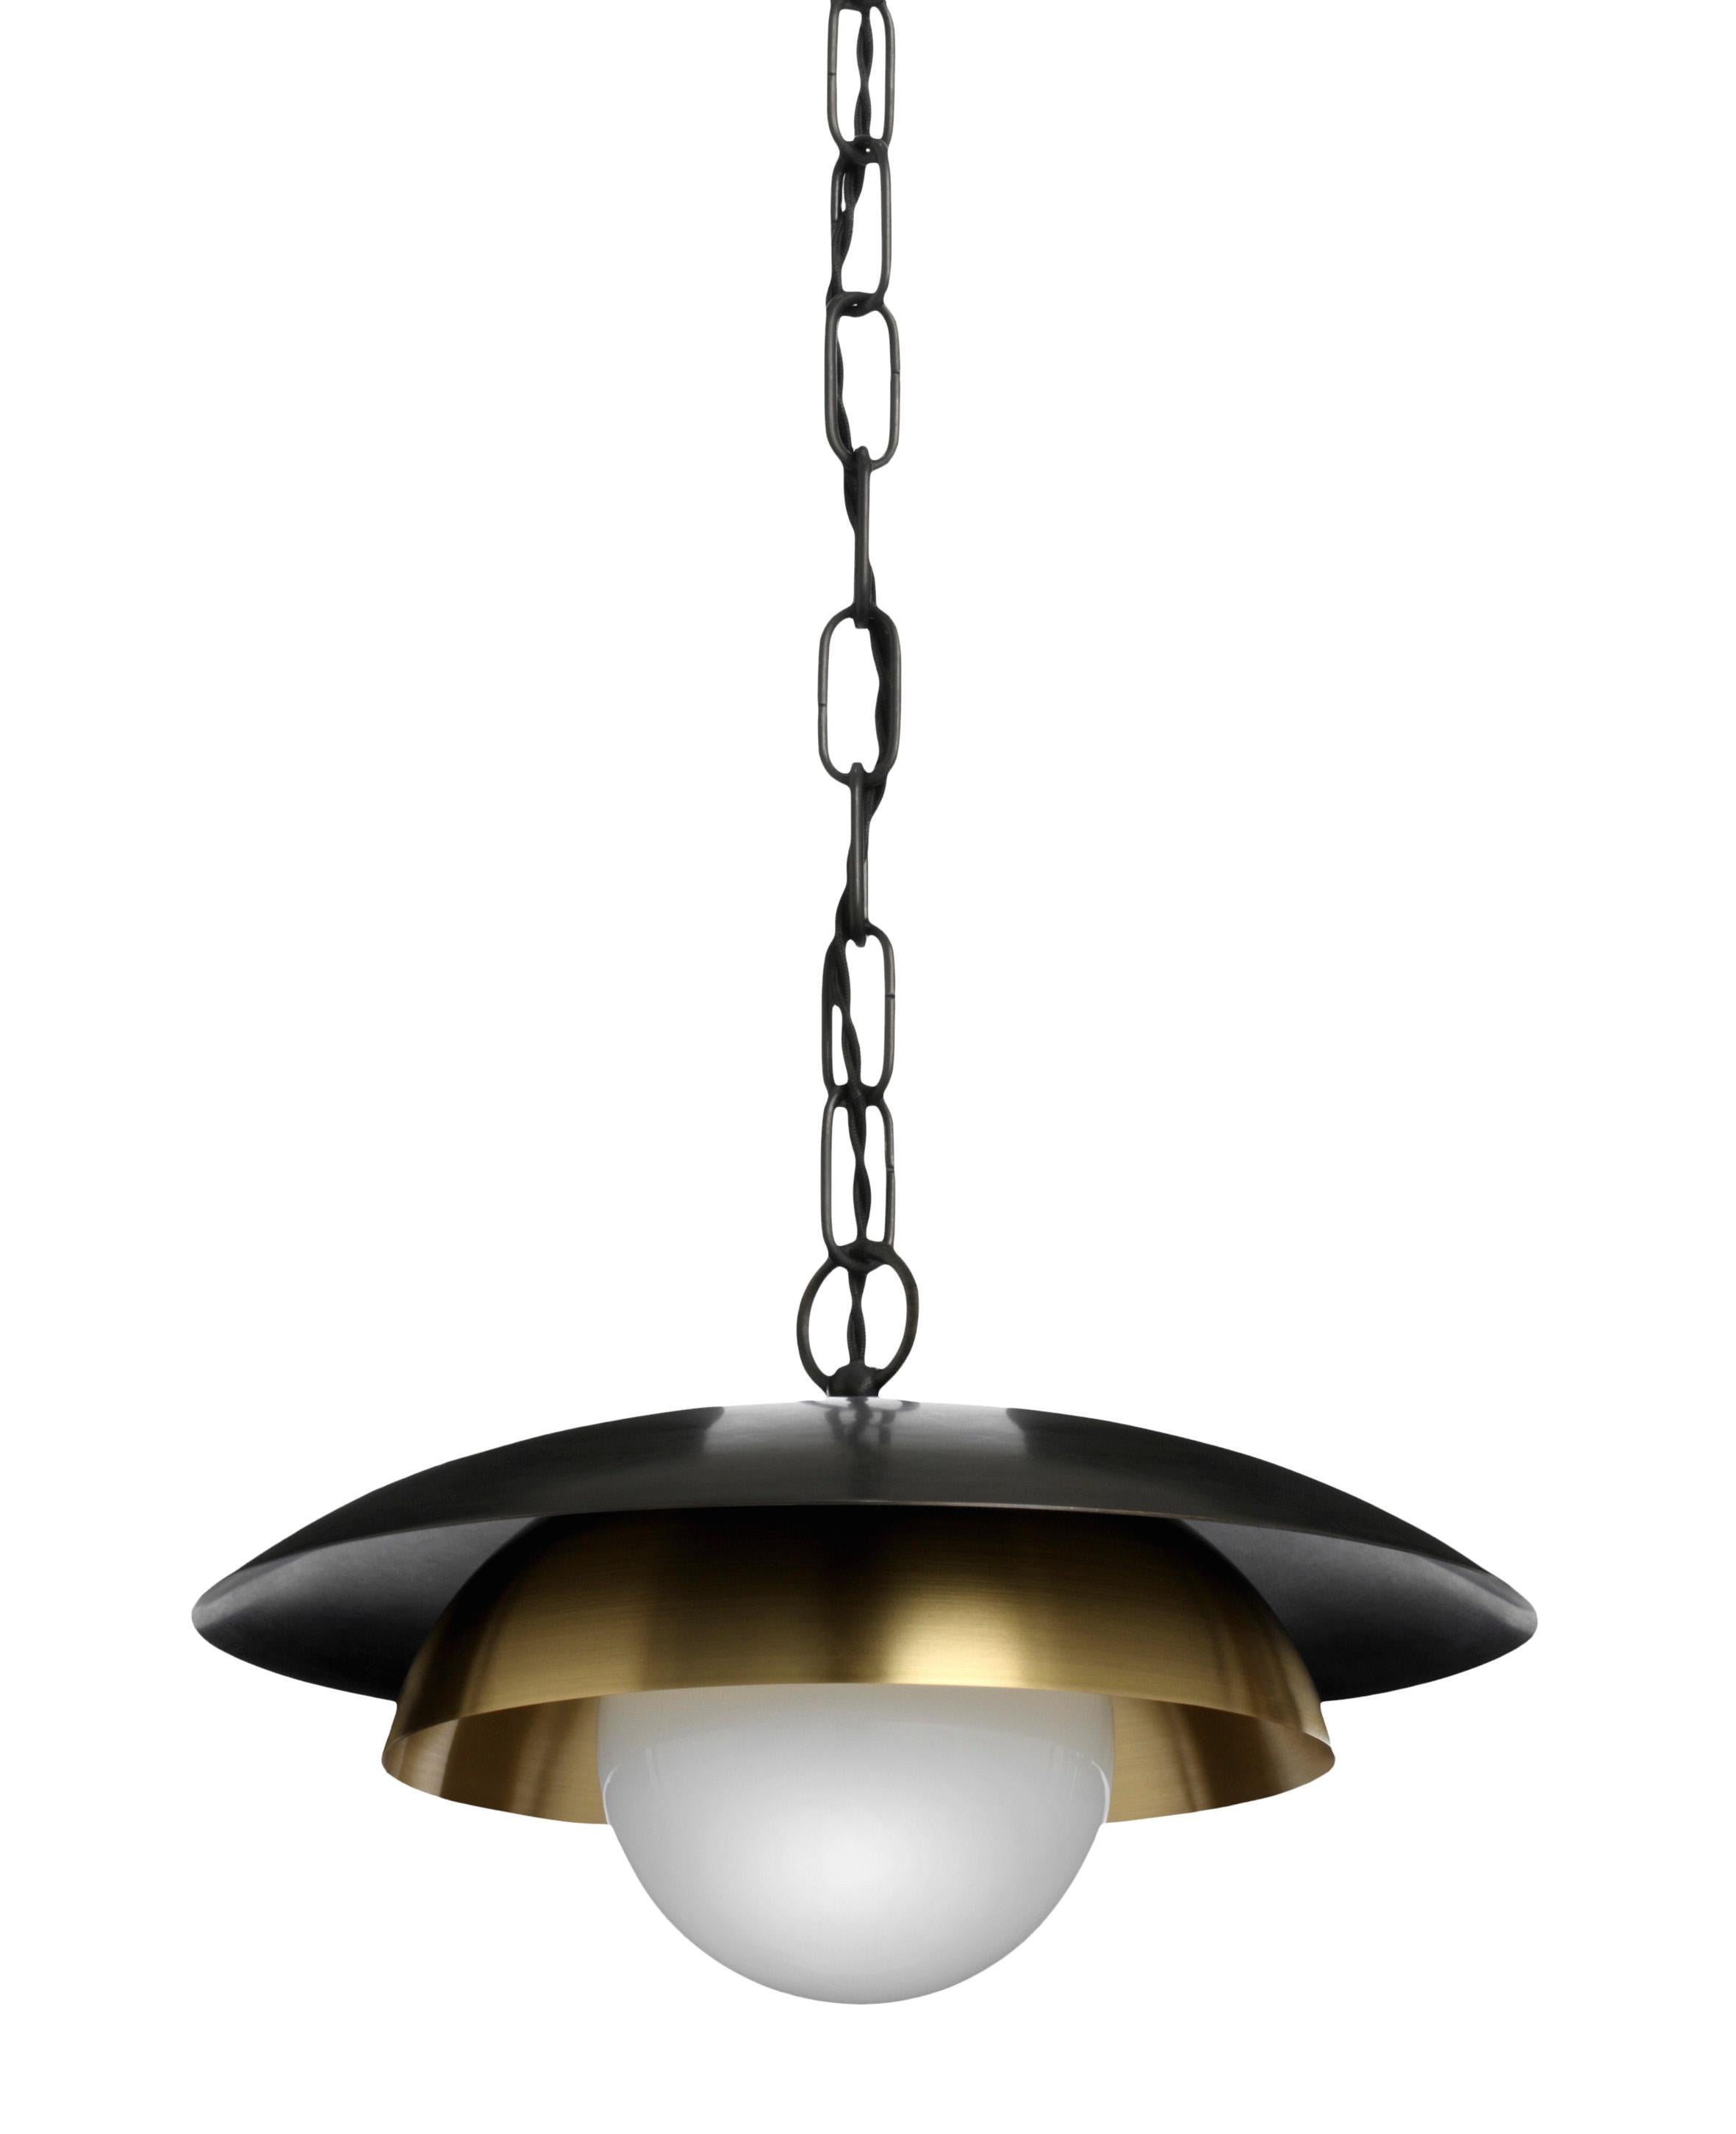 Carapace-Chain pendant lamp by CTO Lighting
Materials: bronze with satin brass, opal glass shade and bronze oval chain/black braided flex
Dimensions: H 15 x W 32 cm

All our lamps can be wired according to each country. If sold to the USA it will be